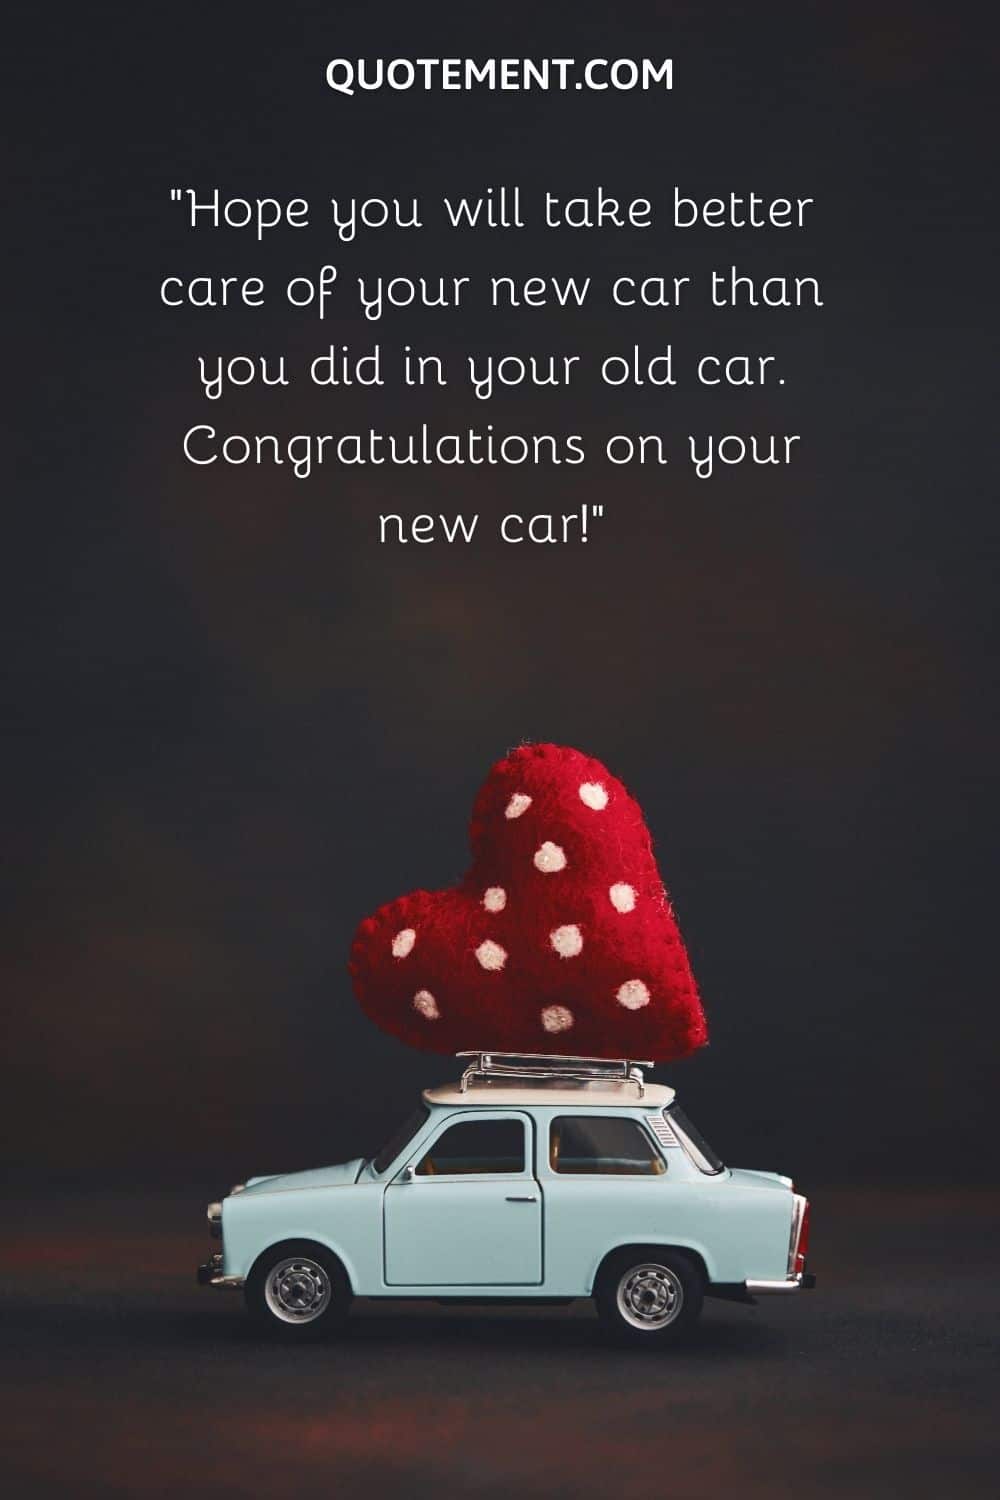 Hope you will take better care of your new car than you did in your old car